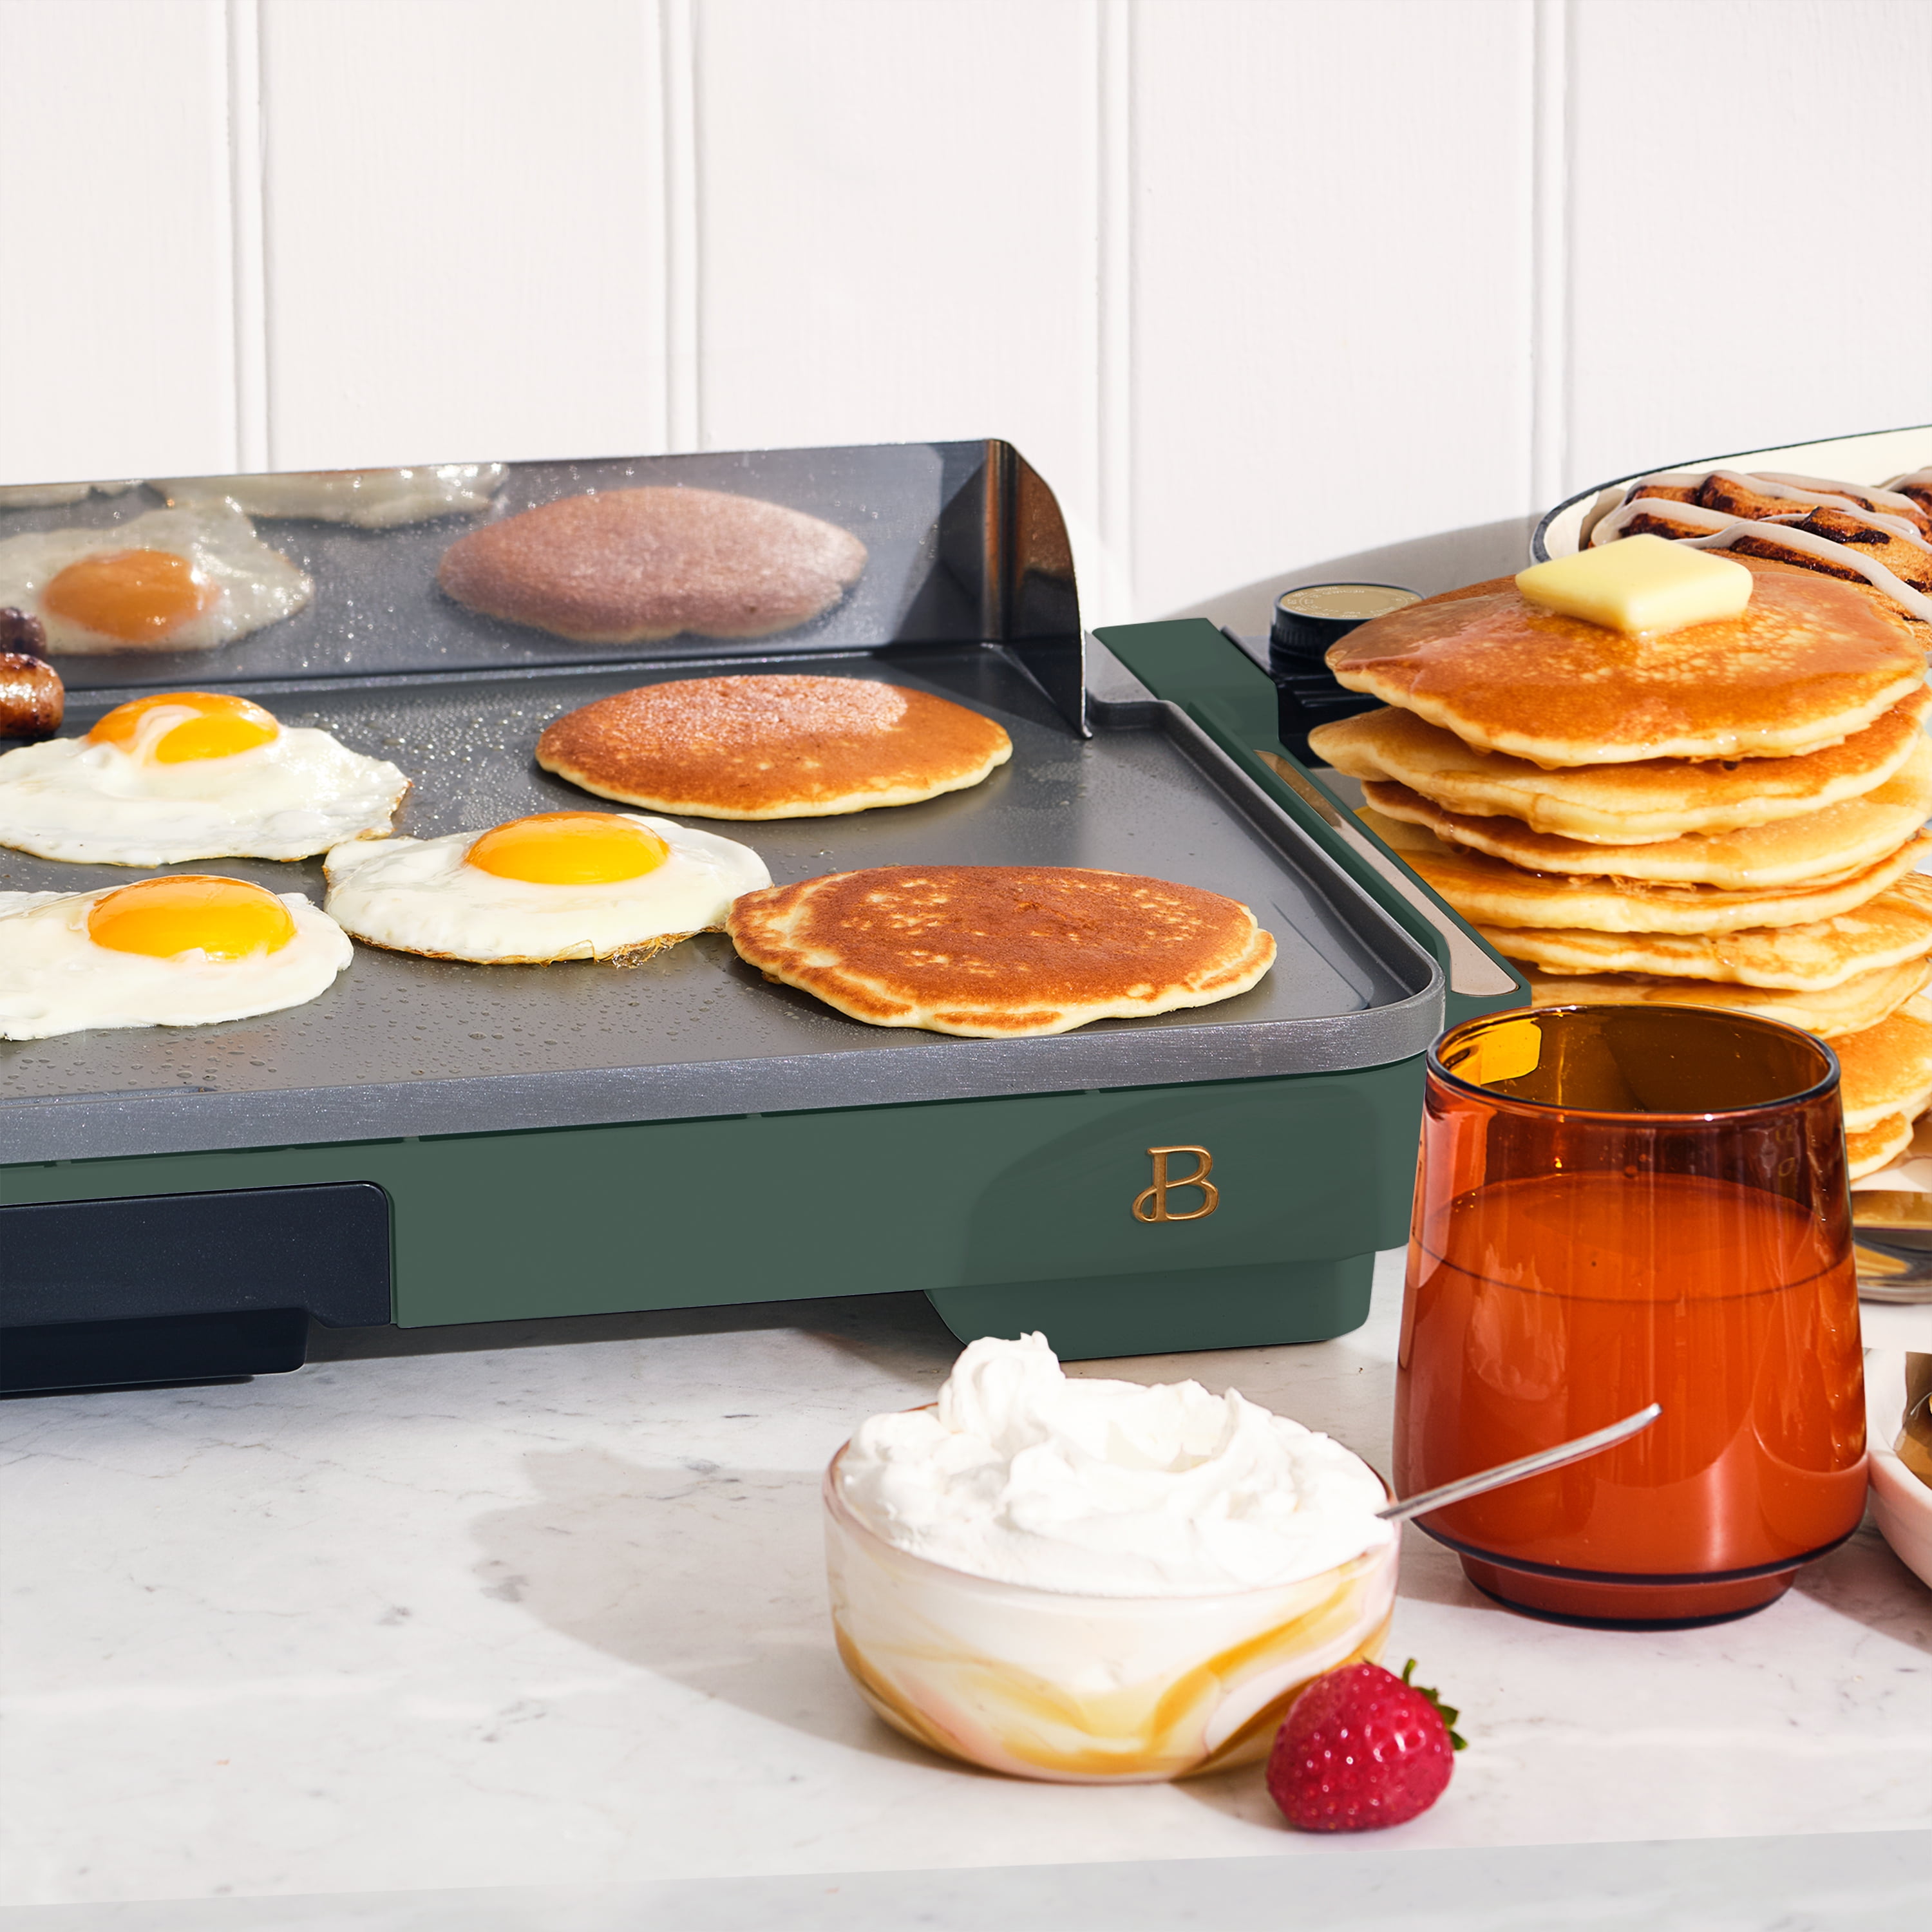 This griddle changed the way I make pancakes — and much more